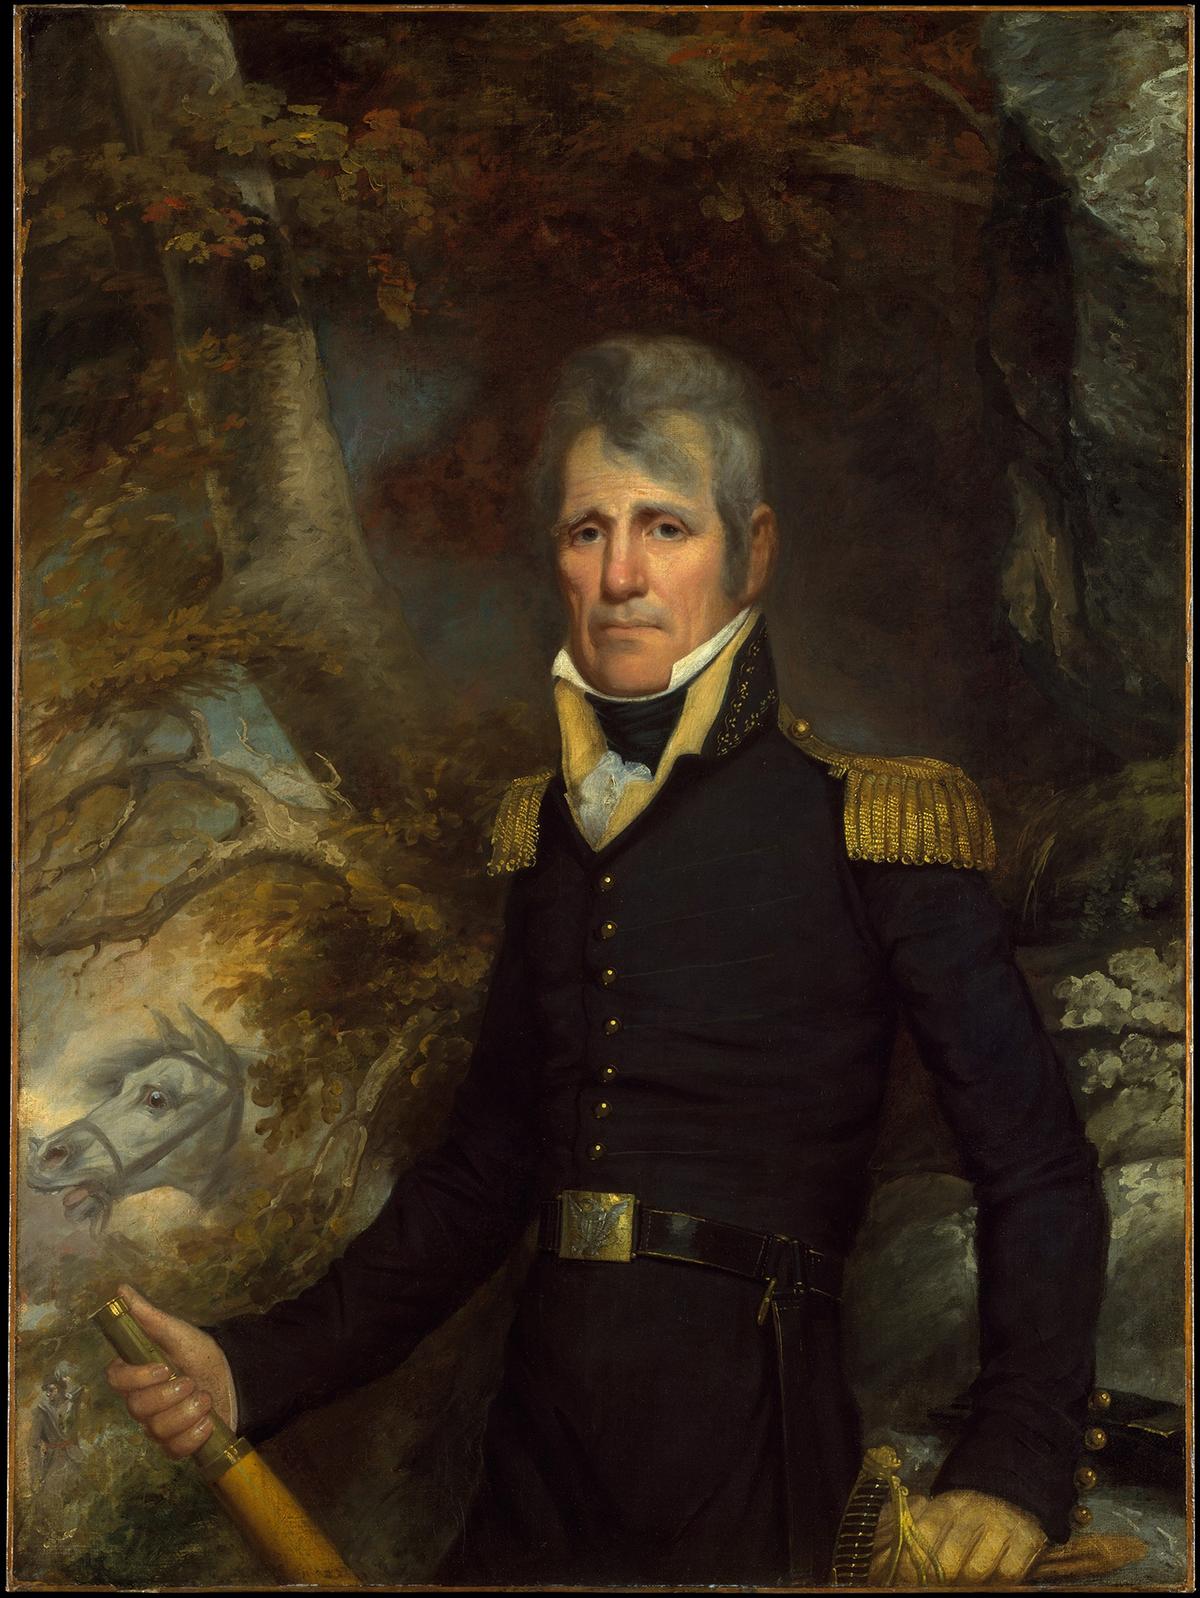 Andrew Jackson's triumphal military portrait which he was celebrated as the hero of the War of 1812. "General Andrew Jackson," circa 1819, by John Wesley Jarvis. Oil on canvas. The Metropolitan Museum of Art, New York City. (Public Domain)